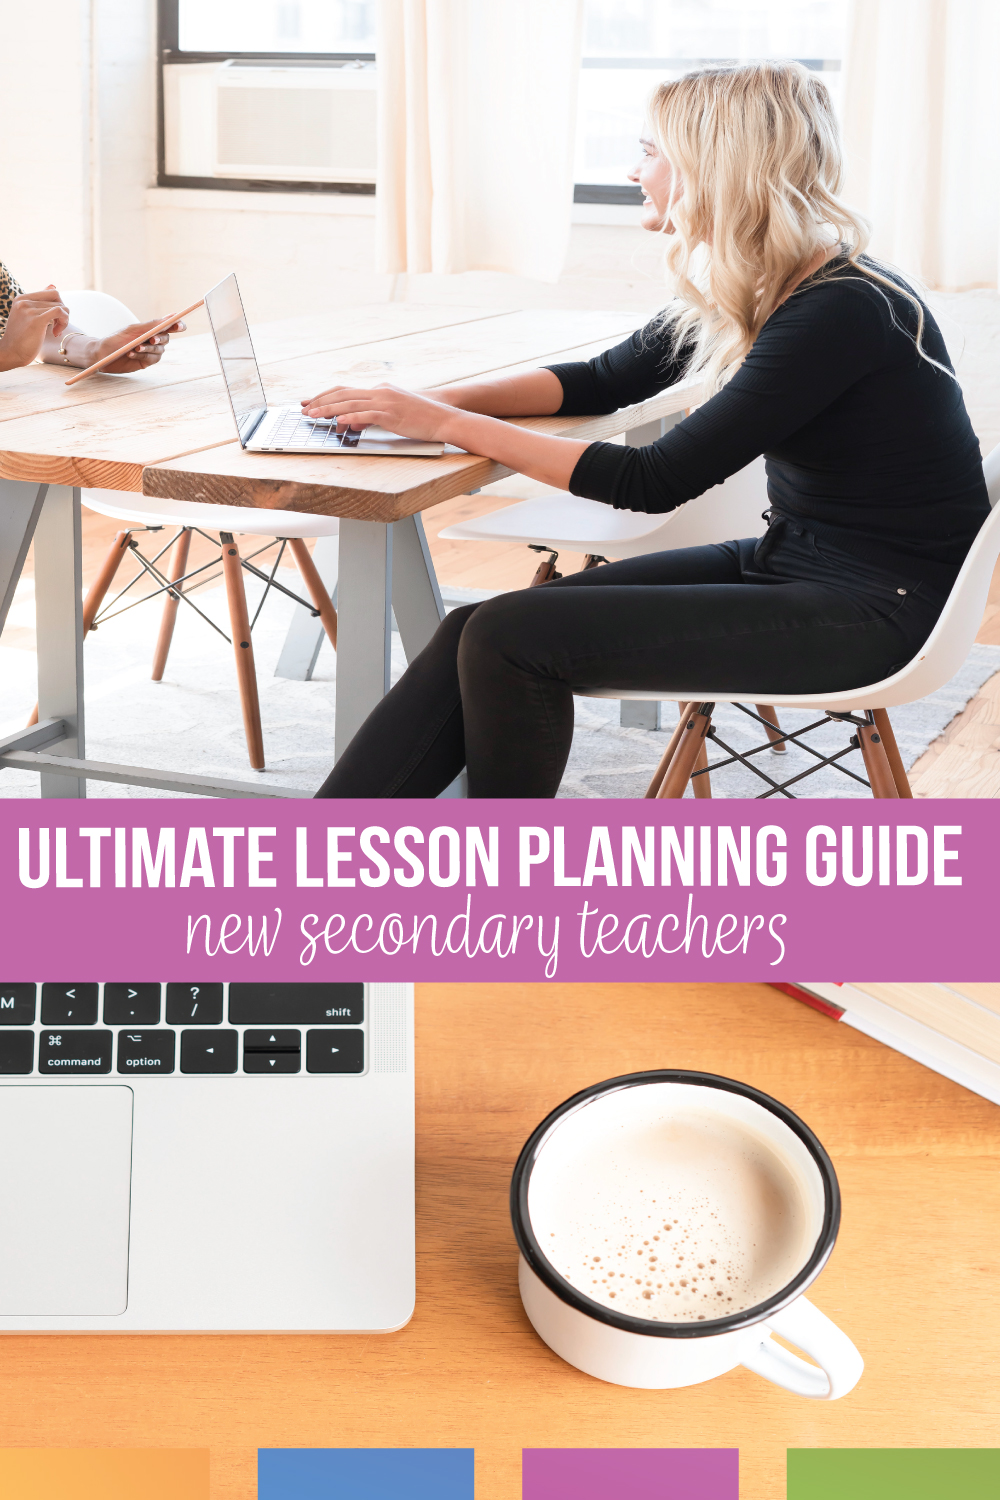 Tips for new teachers: lesson planning. No matter your subject area, as a secondary teacher, you'll look for lesson planning tips to help survive the first few years in education. An experienced educator provides tips for lesson planning that will meet standards & save you time.